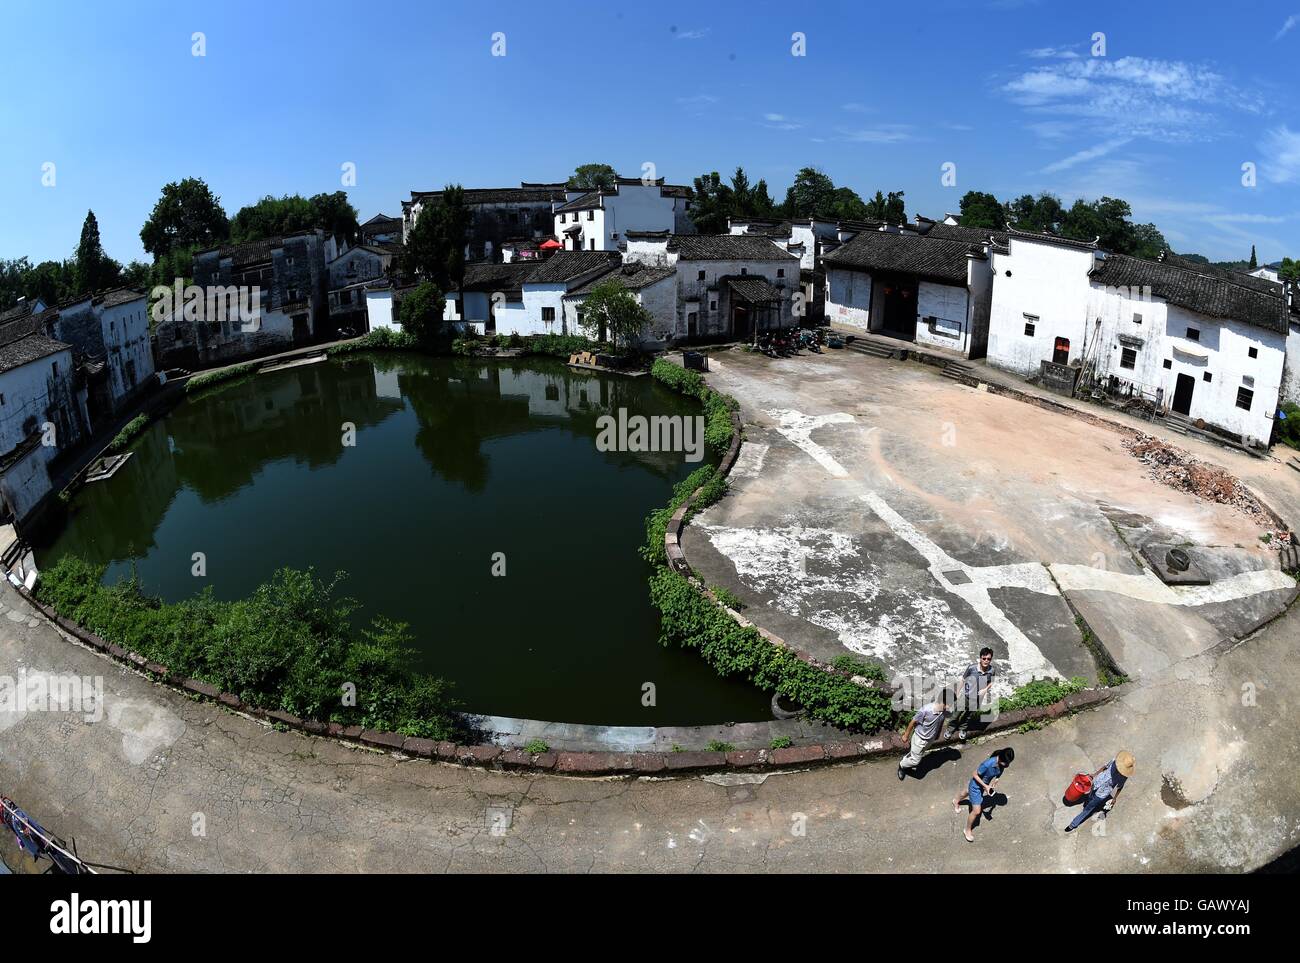 (160706) -- LANXI, July 6, 2016 (Xinhua) -- Tourists walk along the Bell Pond in Zhuge Village in Lanxi City, east China's Zhejiang Province, July 5, 2016. The Zhuge Village, which has more than 660 years of history, is home to descendents of Zhuge Liang, an important military strategist and inventor serving as the Prime Minister of the Shu Kingdom in the period of the Three Kingdoms (220-265). The village was designed and constructed by Zhuge Dashi, 27th descendant of Zhuge Liang, following the design of the Bagua (Eight Diagrams) principles of Fengshui. (Xinhua/Han Chuanhao) (lfj) Stock Photo